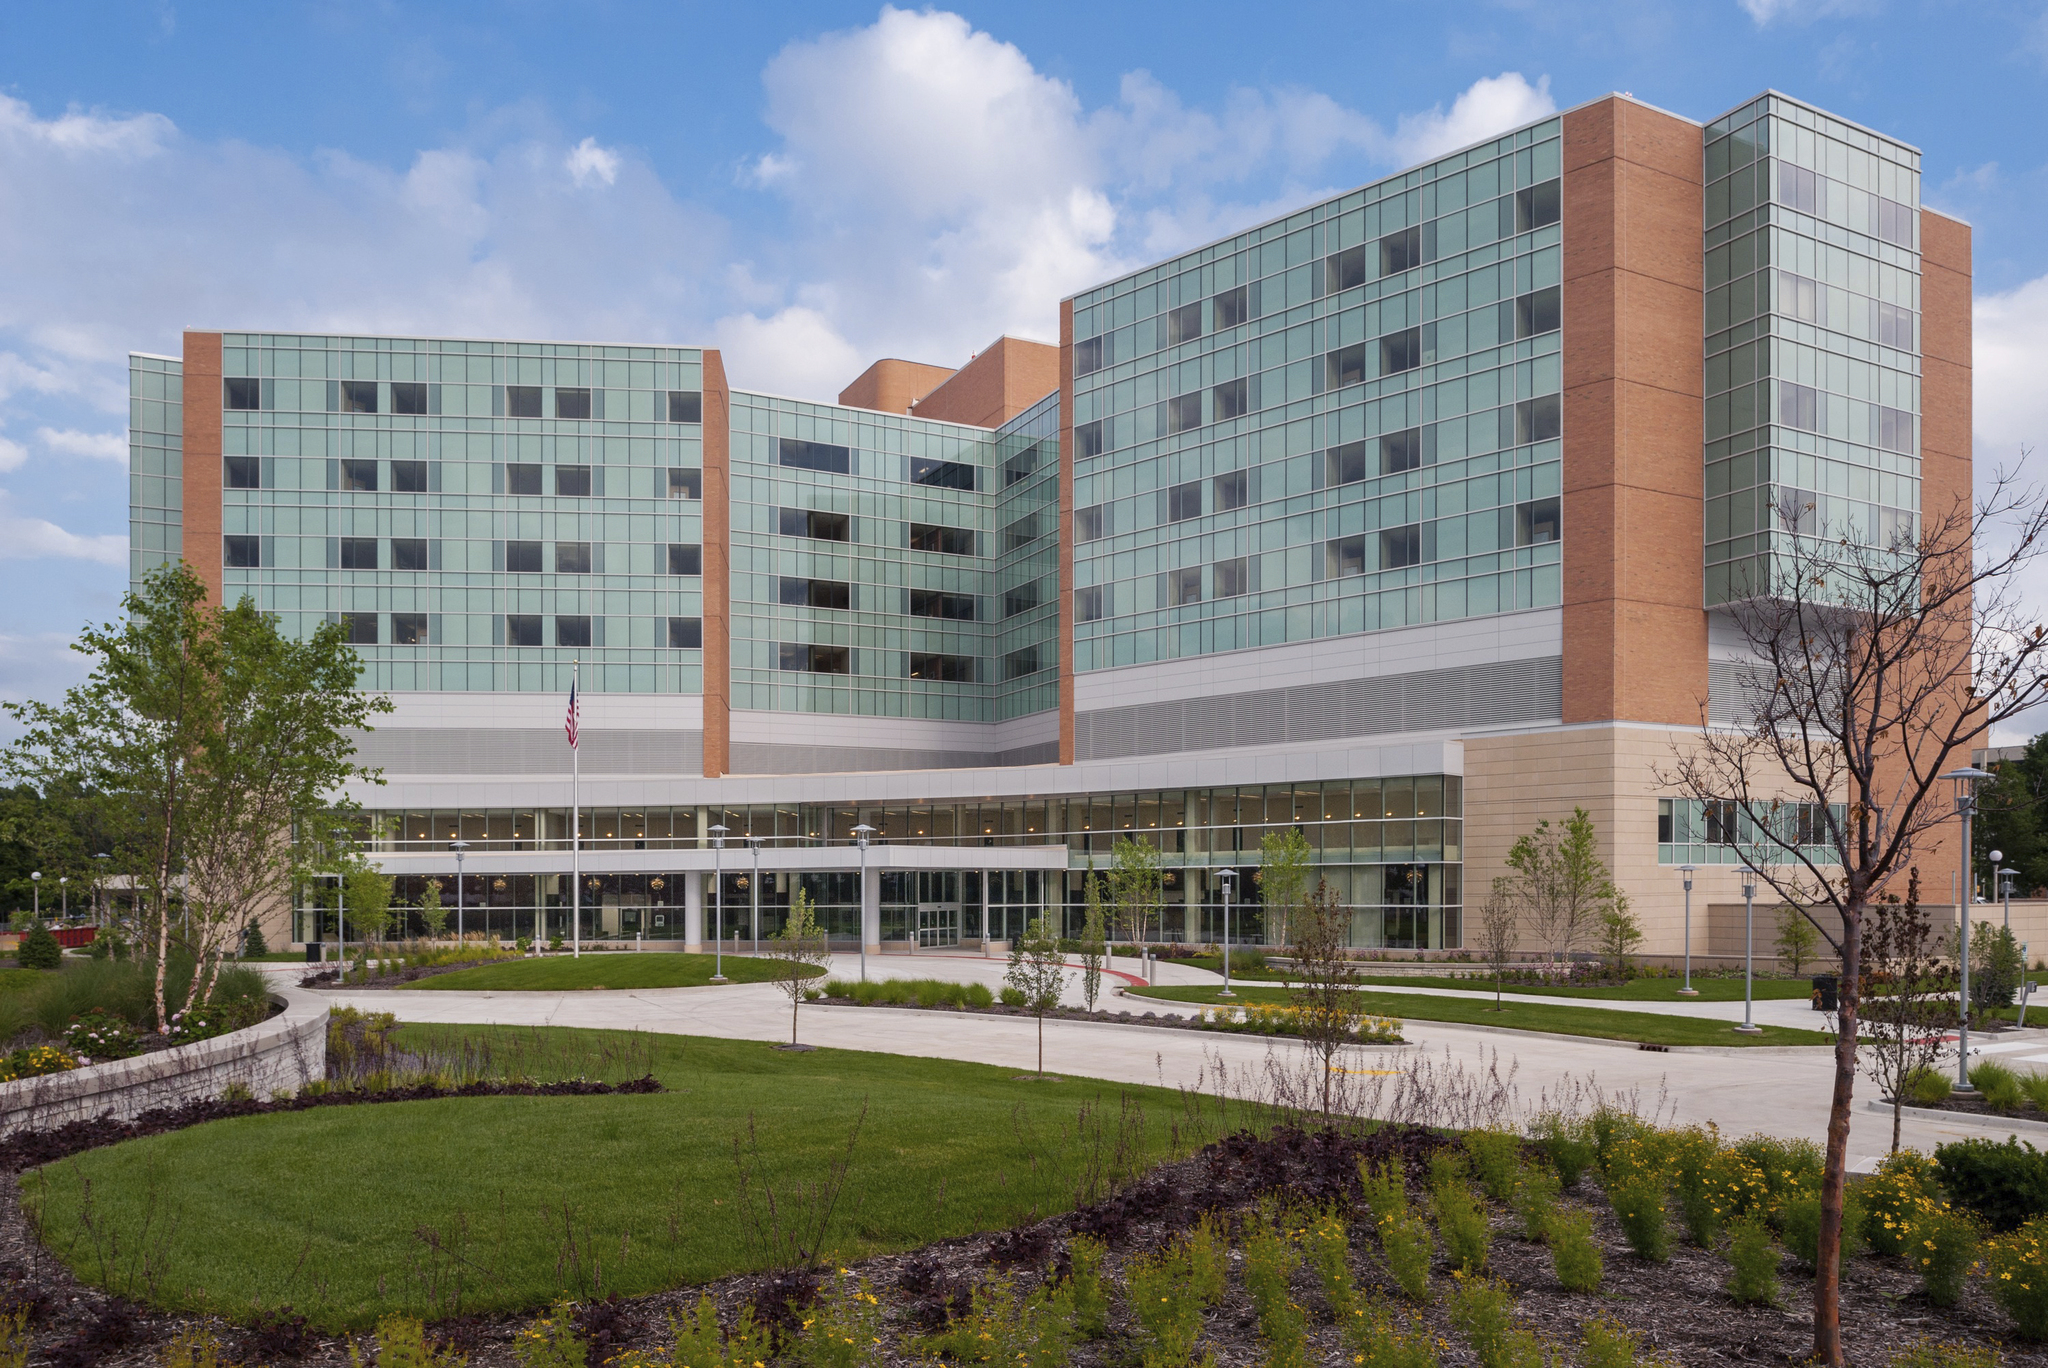 Carle among top 1% of U.S. hospitals for clinical outcomes according to Healthgrades